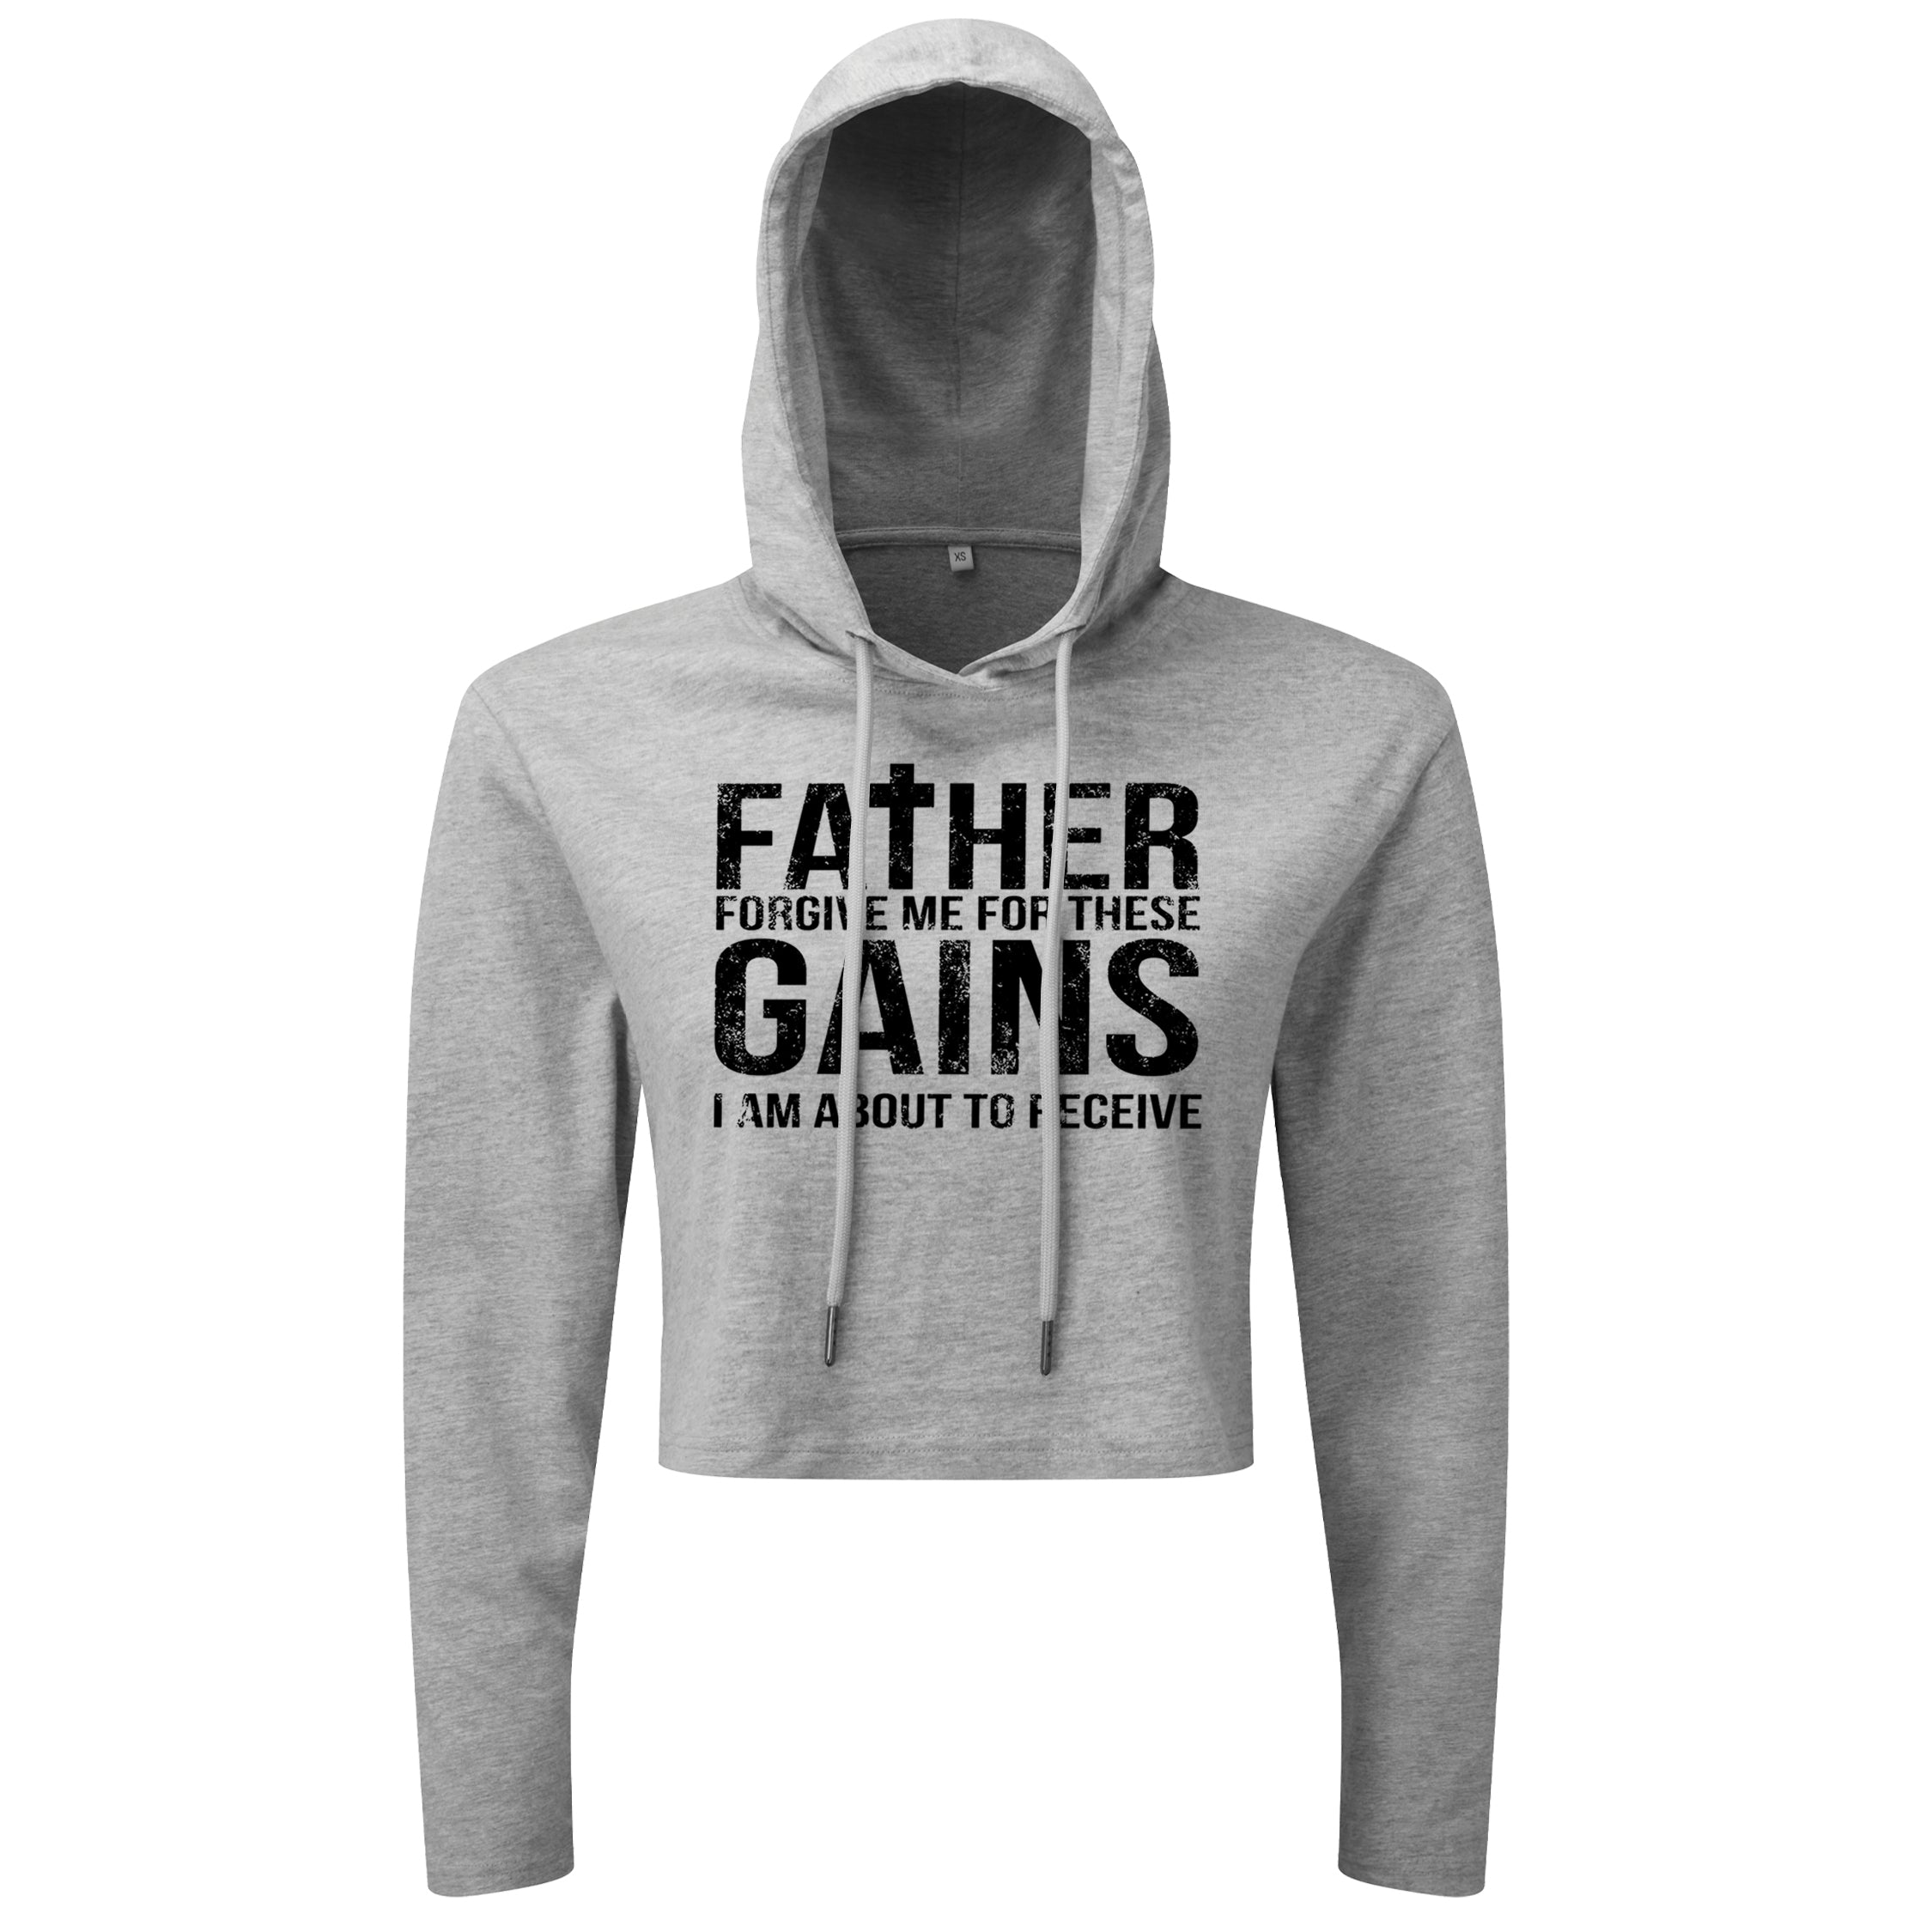 Forgive Me Father For These Gains - Cropped Hoodie